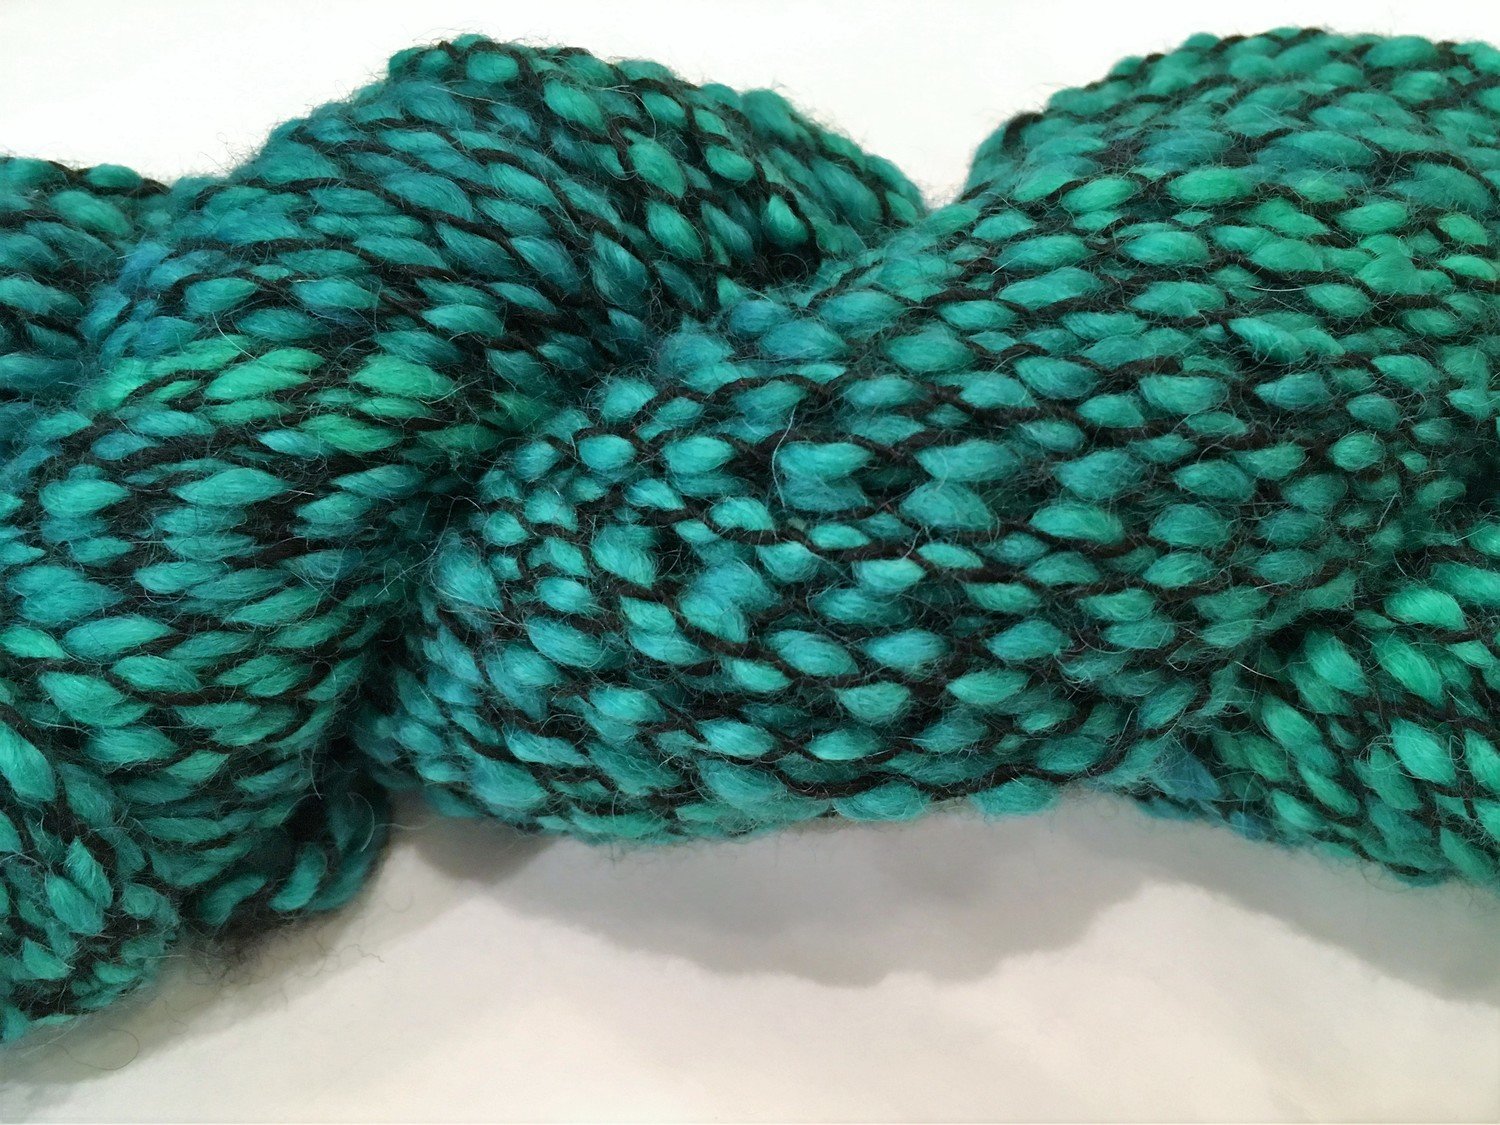 Breezy Hill Cottage-Milled, Corded Yarn - Emerald